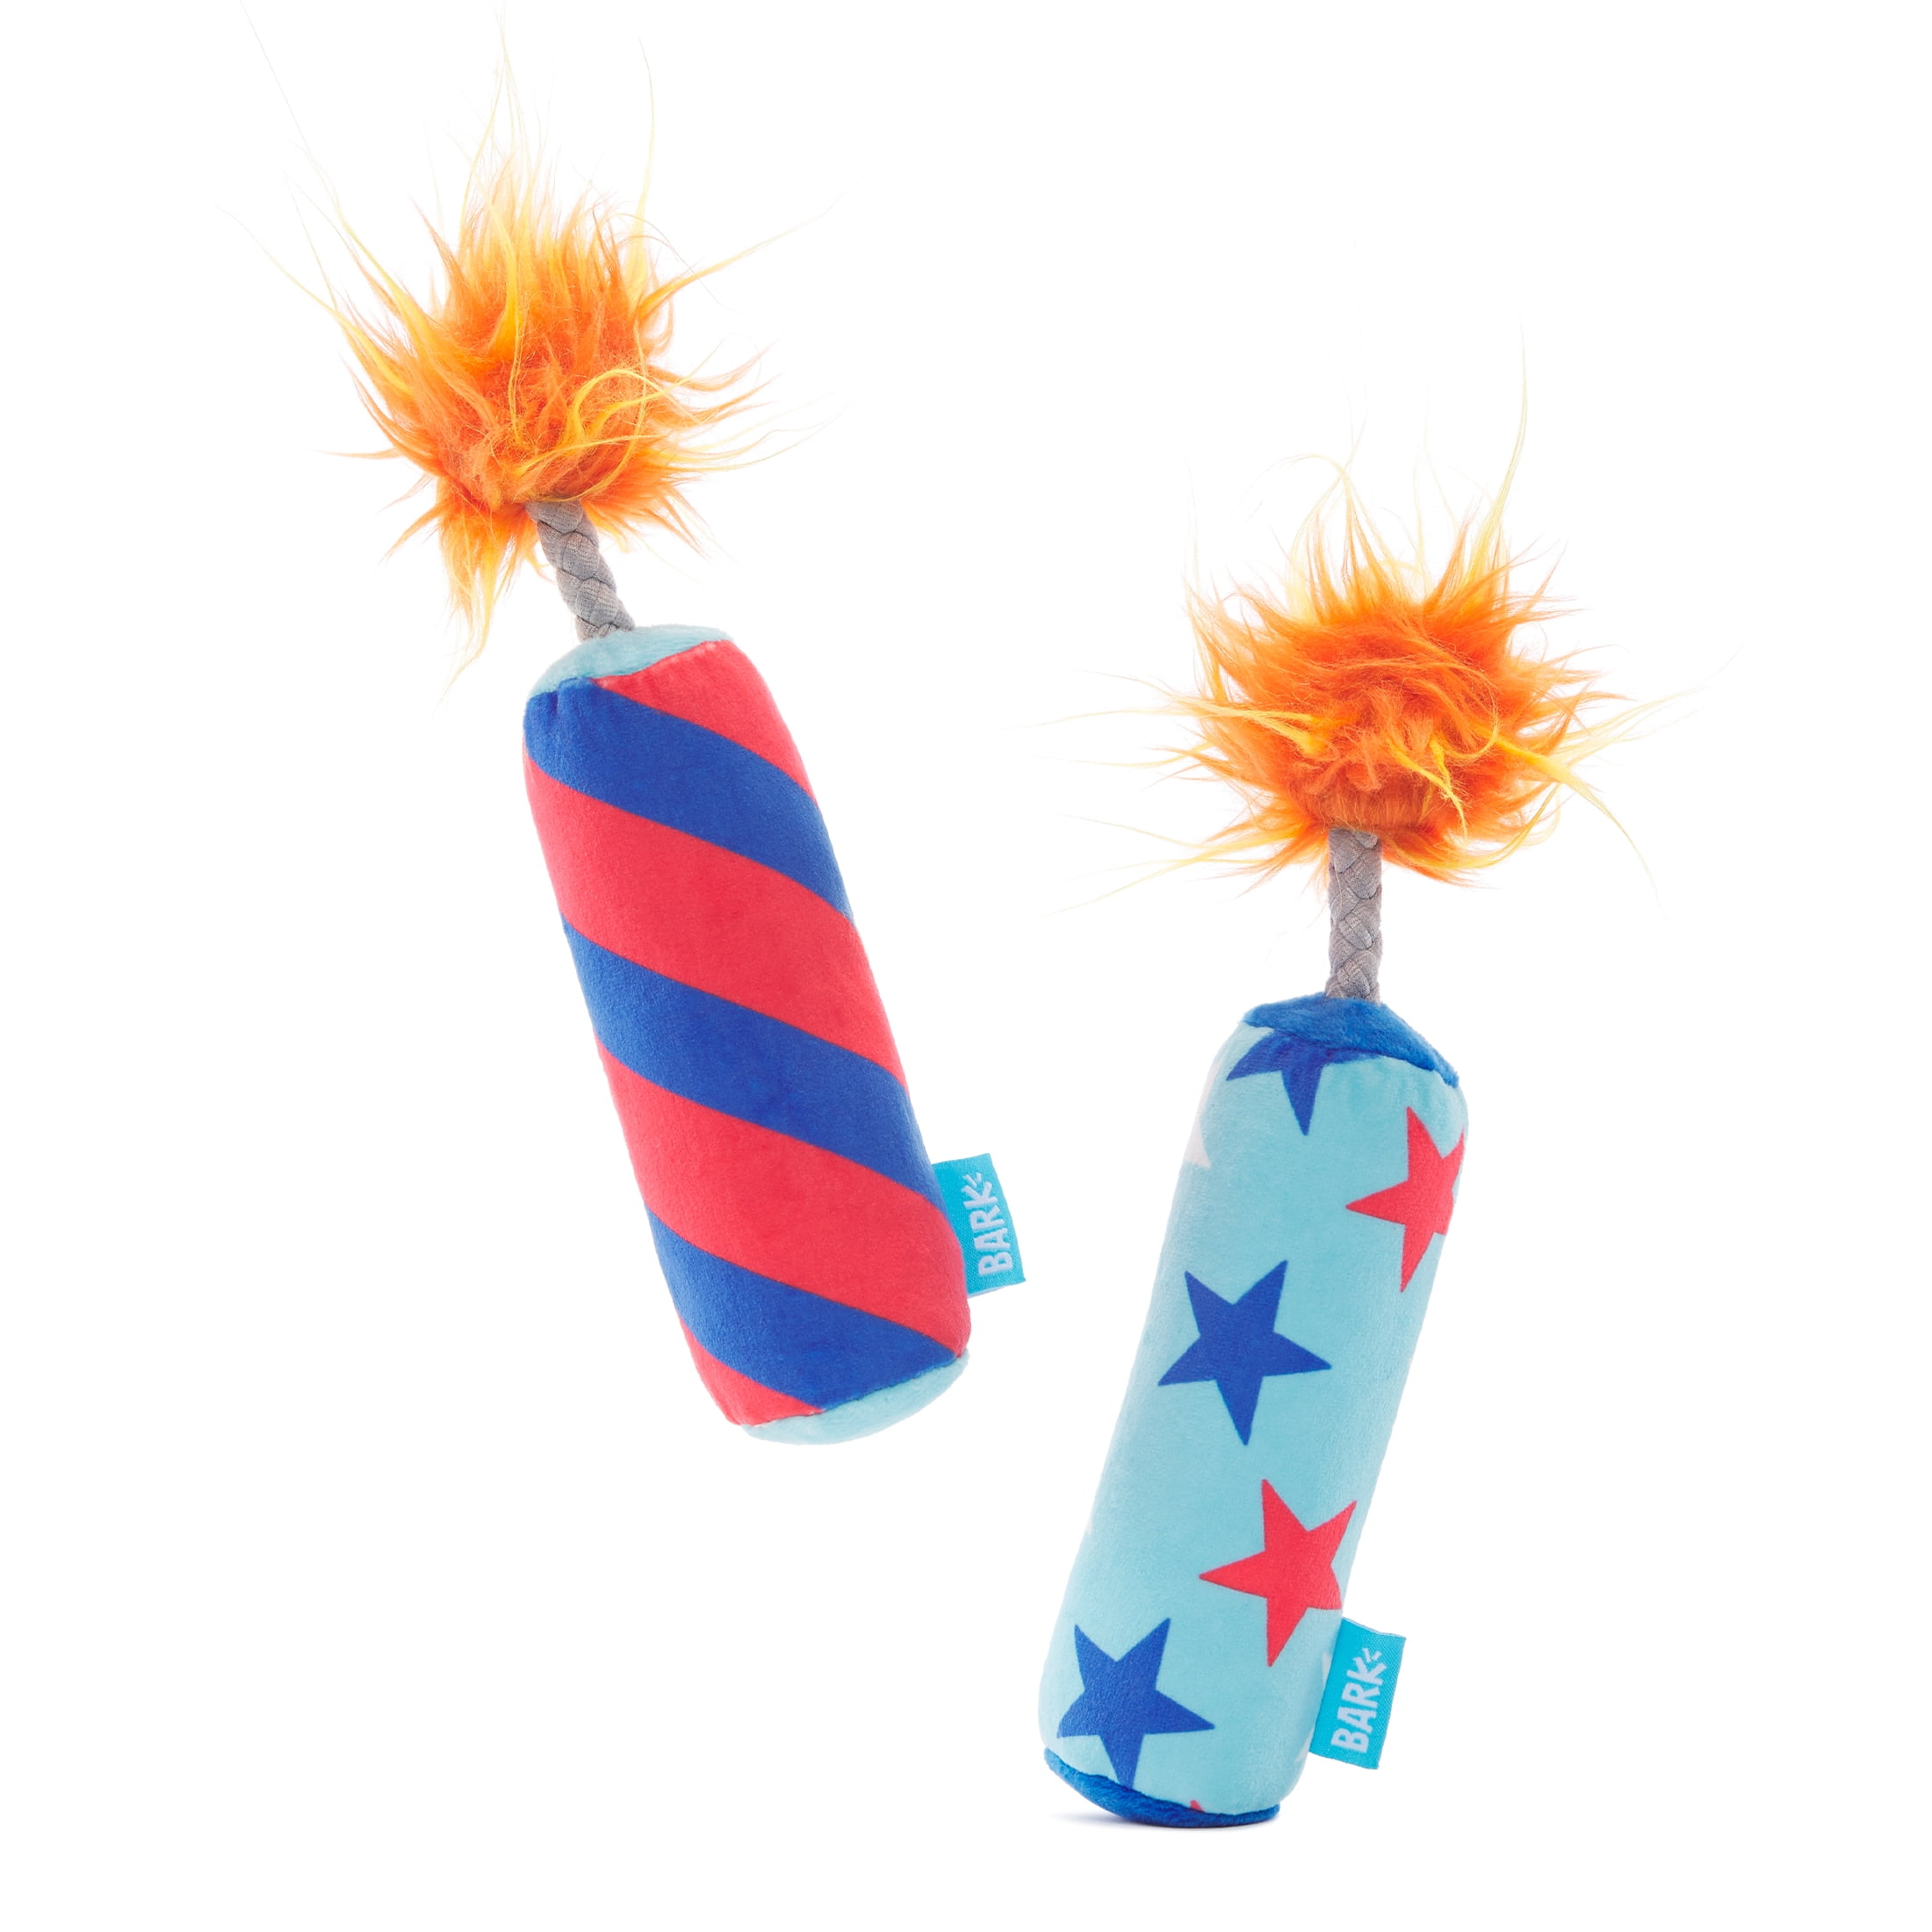 Bark Pup-Pup Fireworks - 2 Yankee Doodle Dog Toys, XS-S Dogs, with T-Shirt Rope Great for Tug-O-War, Size: ExtraSmall/Small Breeds